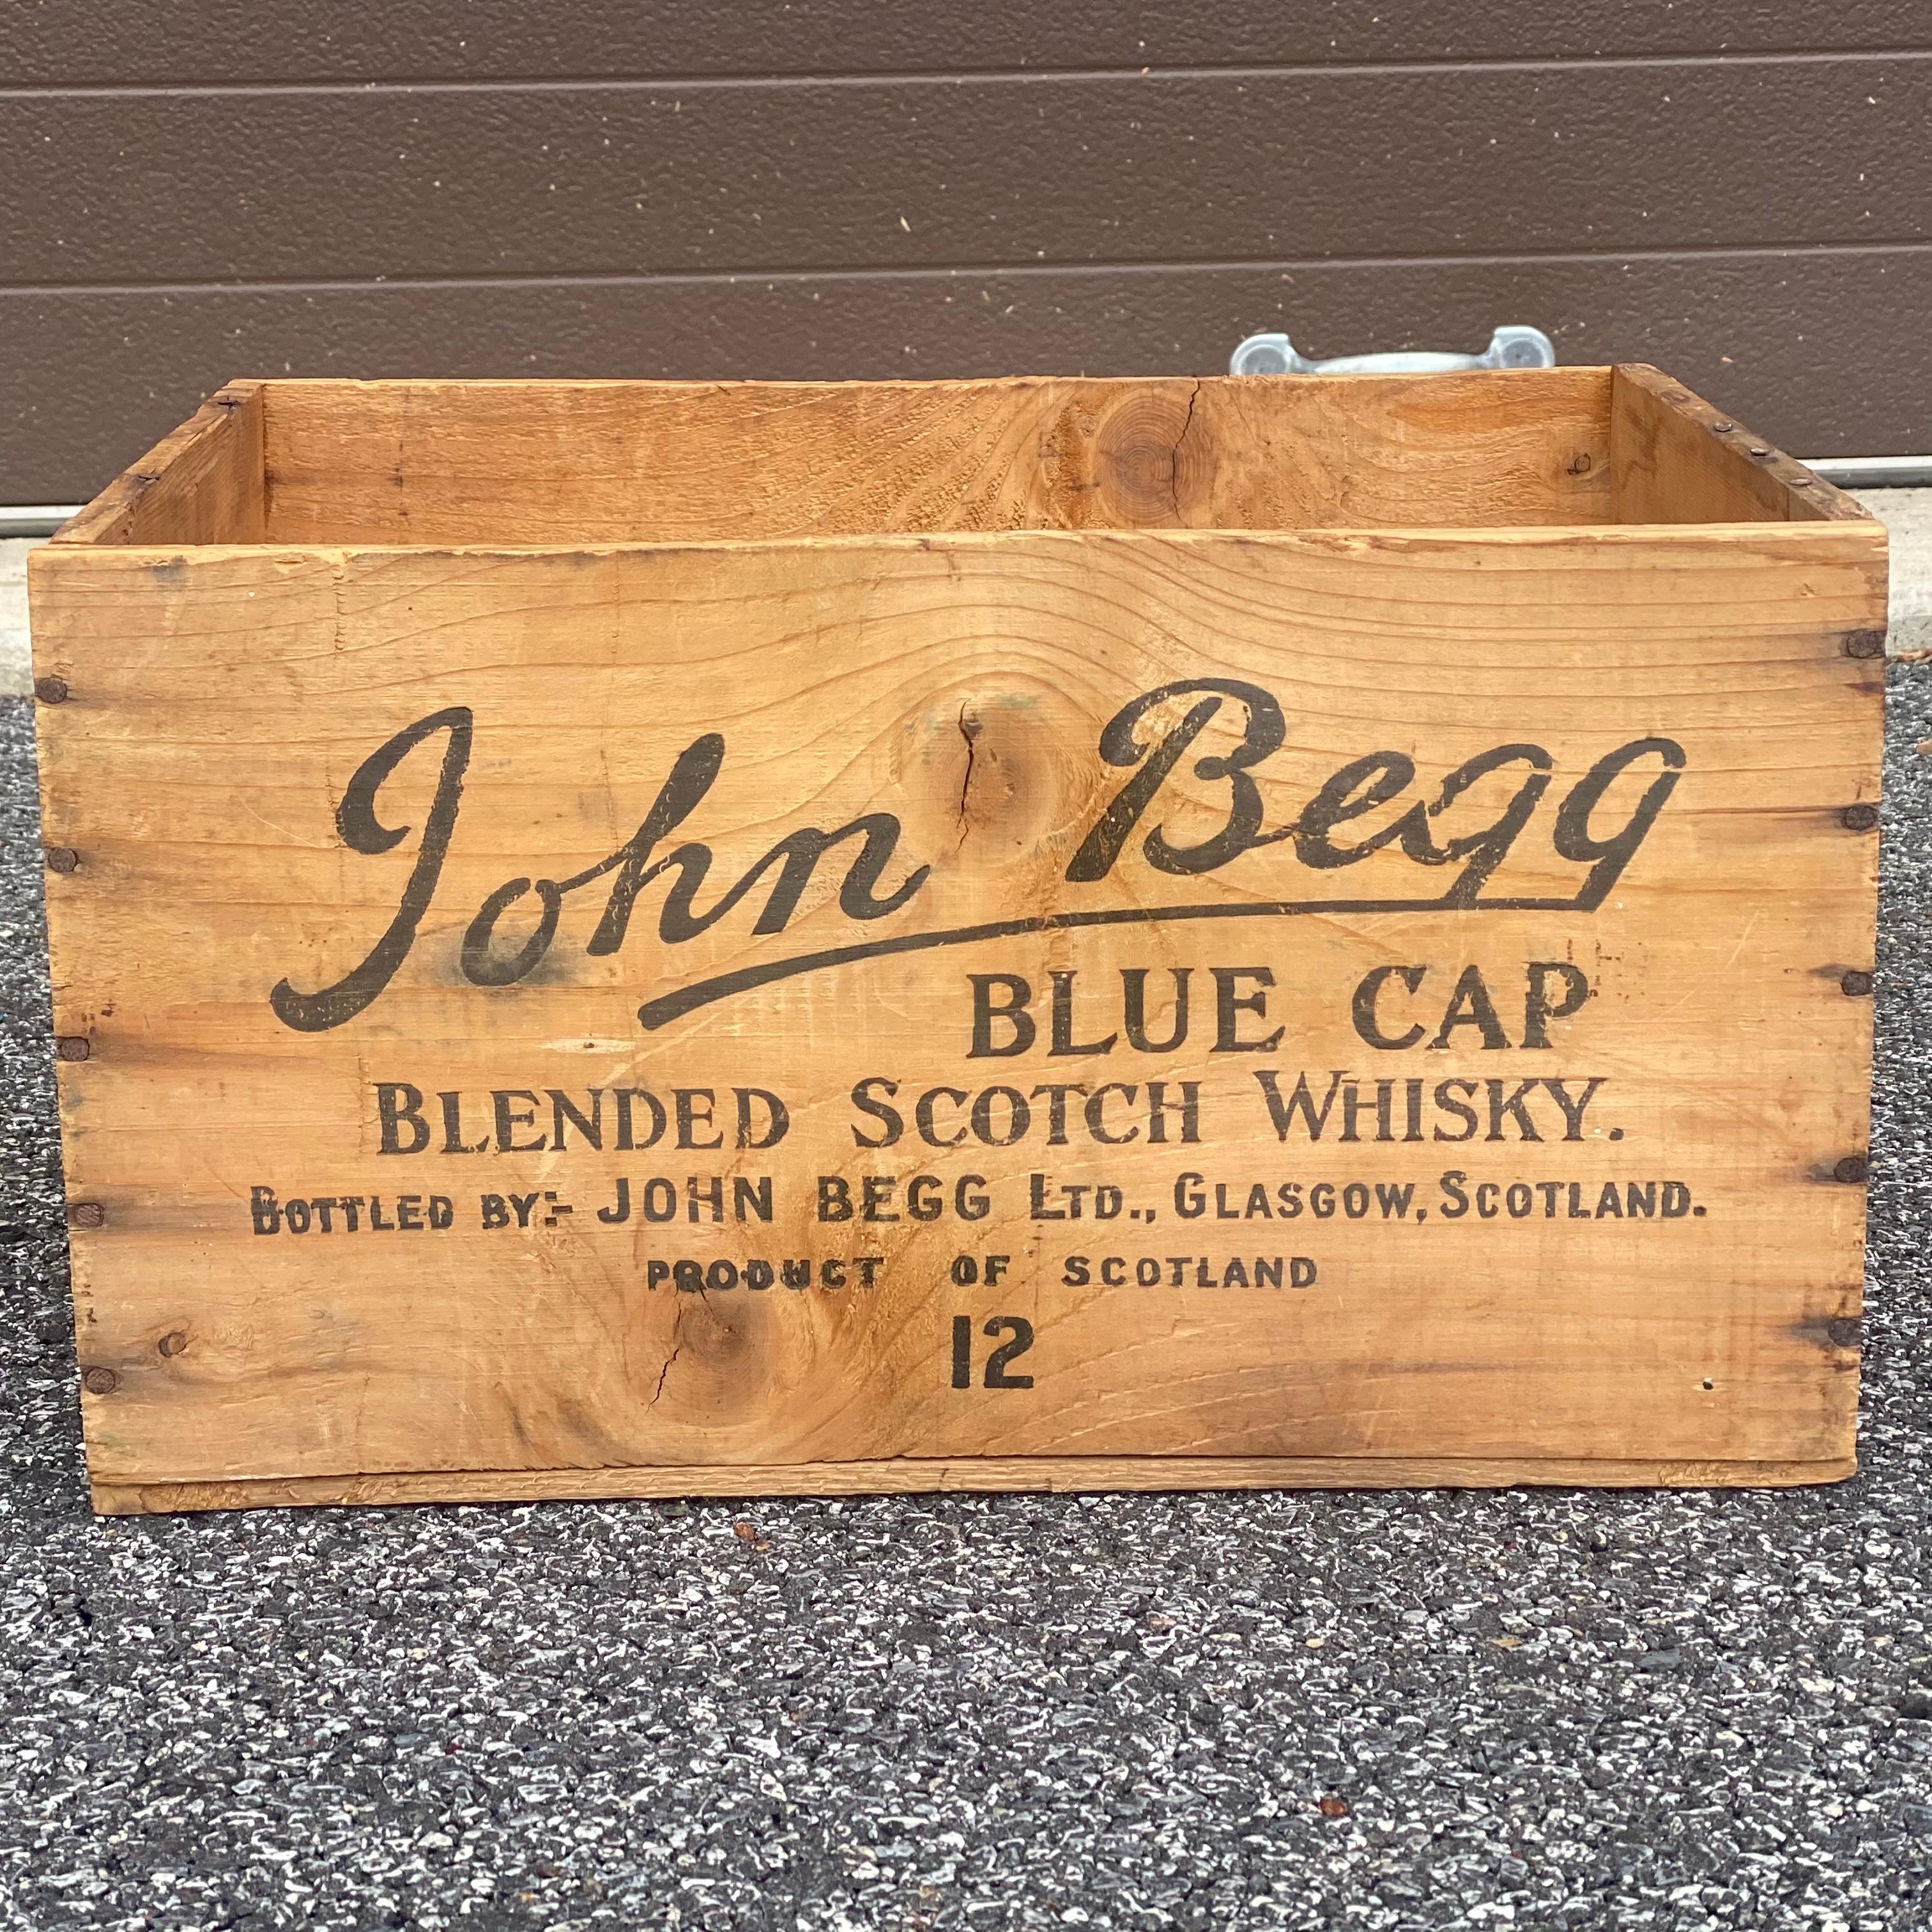 Vintage John Begg Blue Cap Blended Scotch Whiskey wooden crate with lettering on four sides
Circa 1950s.
Interior dimensions roughly 
11.75”x 15.375” x 8.75”h